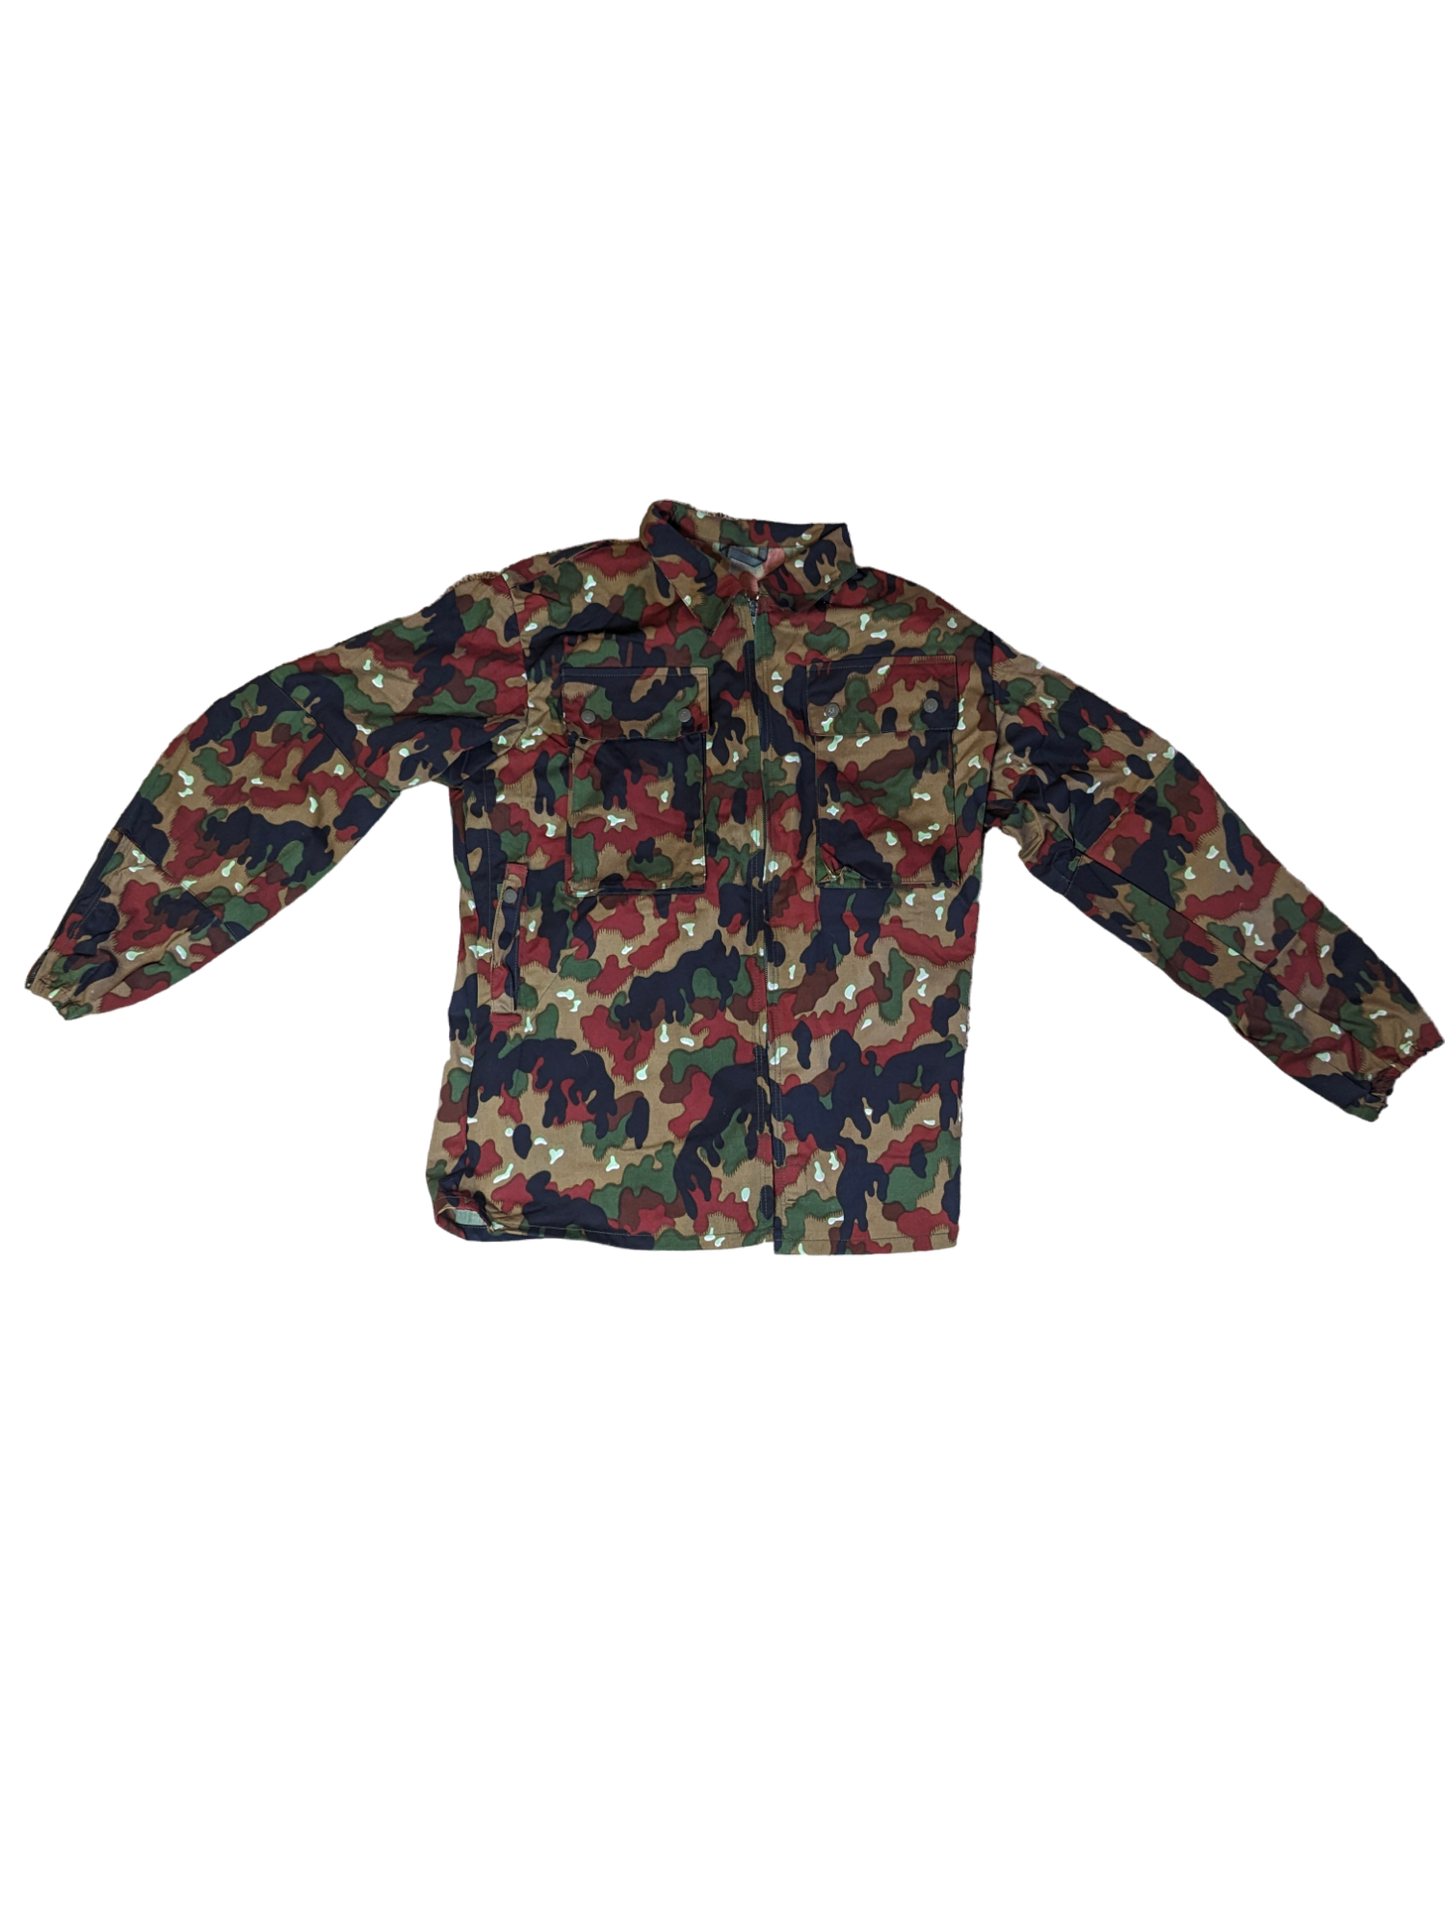 A durable, long-sleeve **Swiss M83 Camo Field Shirt** by **Six Gun Surplus**, featuring shades of green, brown, and black with functional front pockets on each side of the chest. The shirt is displayed against a solid black background.